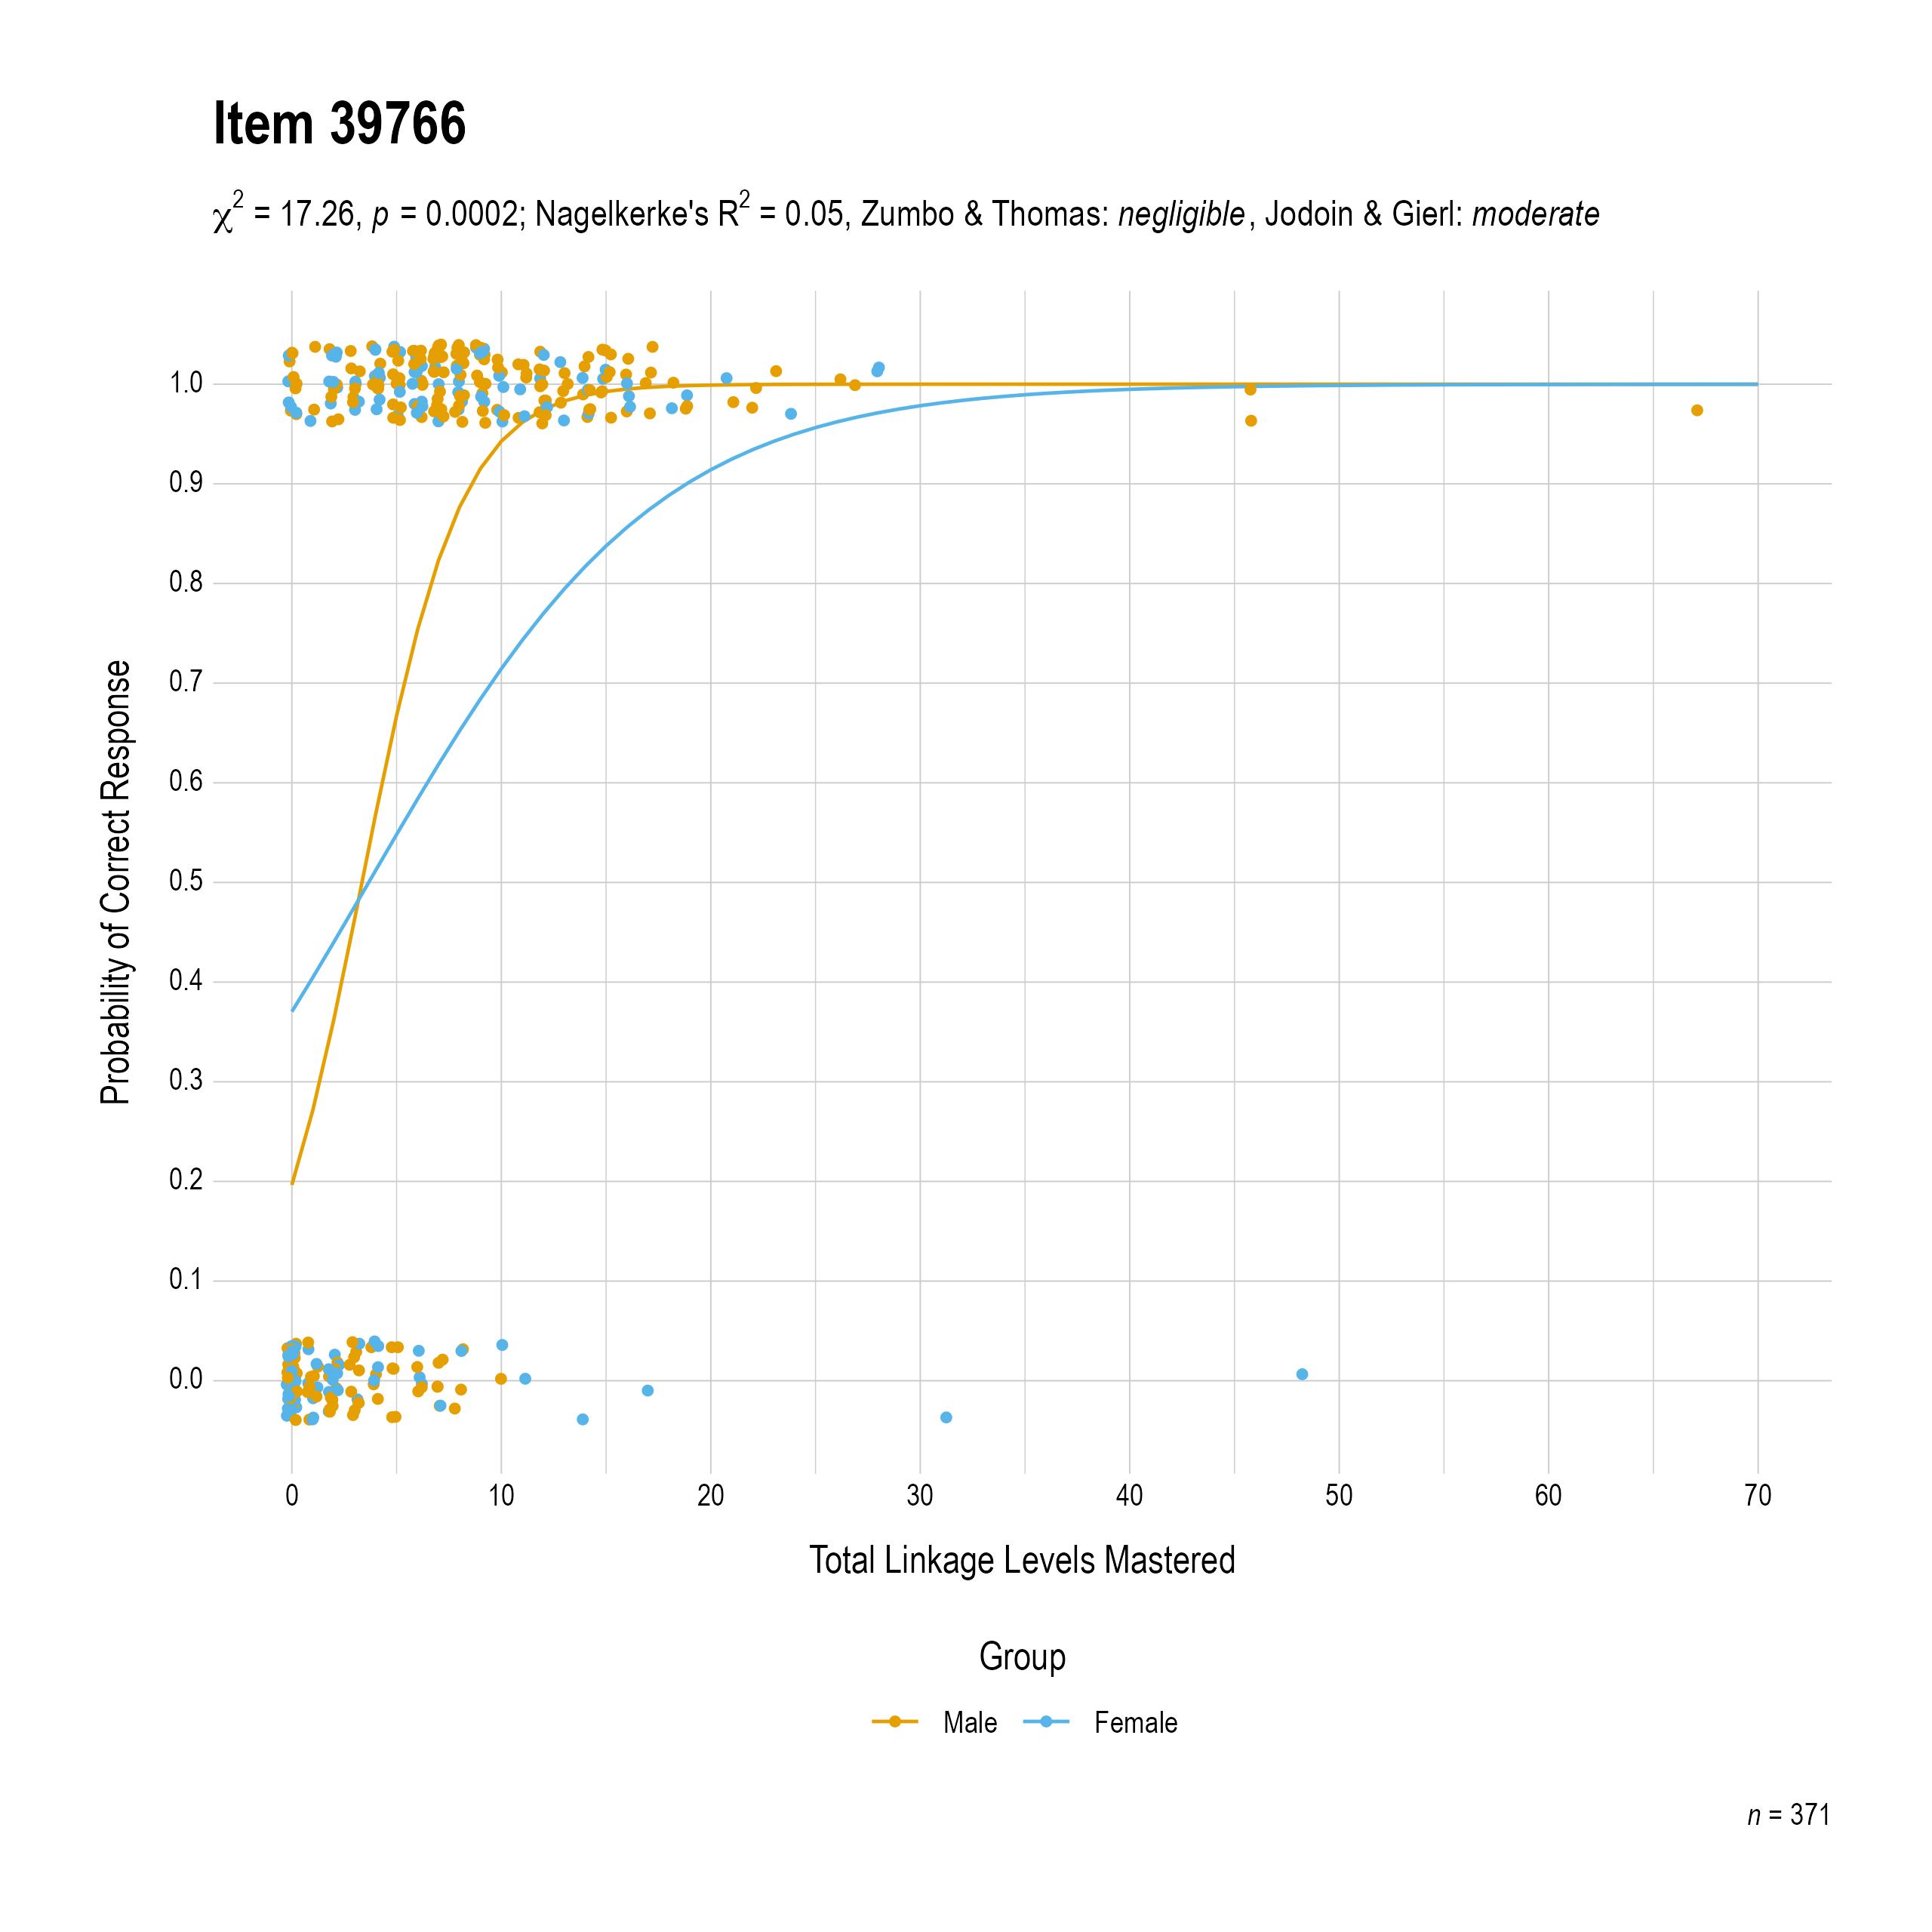 The plot of the combined gender differential item function evidence for English language arts item 39766. The figure contains points shaded by group. The figure also contains a logistic regression curve for each group. The total linkage levels mastered in is on the x-axis, and the probability of a correct response is on the y-axis.